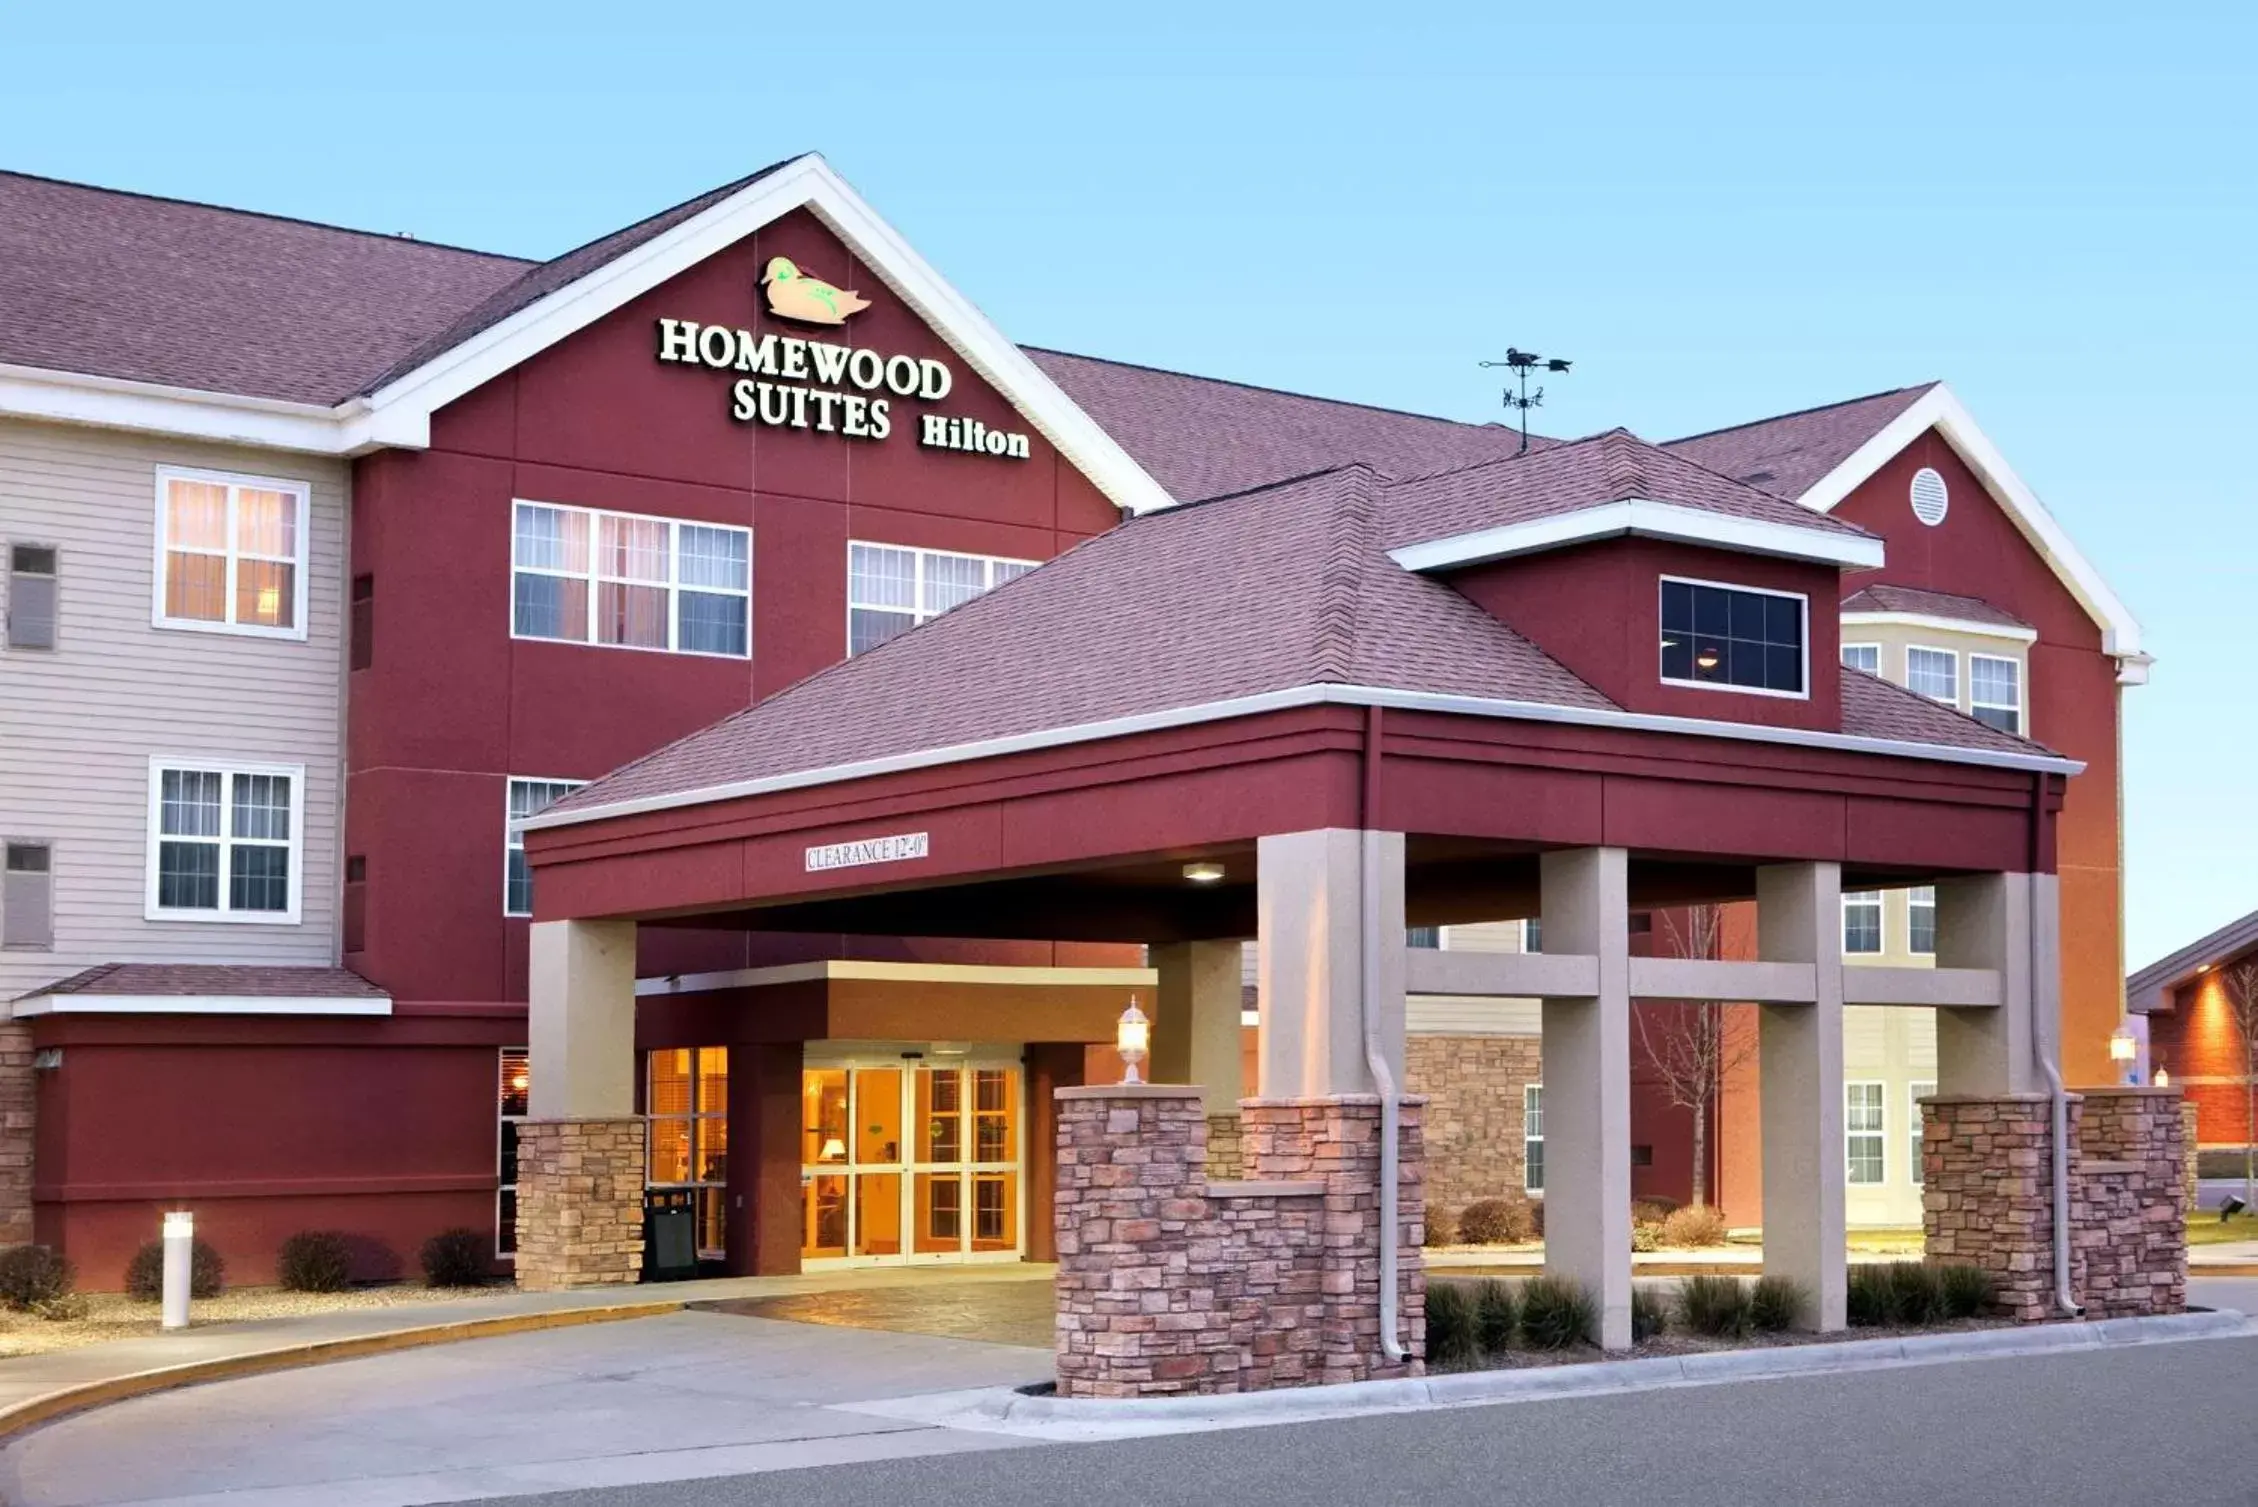 Property Building in Homewood Suites by Hilton Sioux Falls